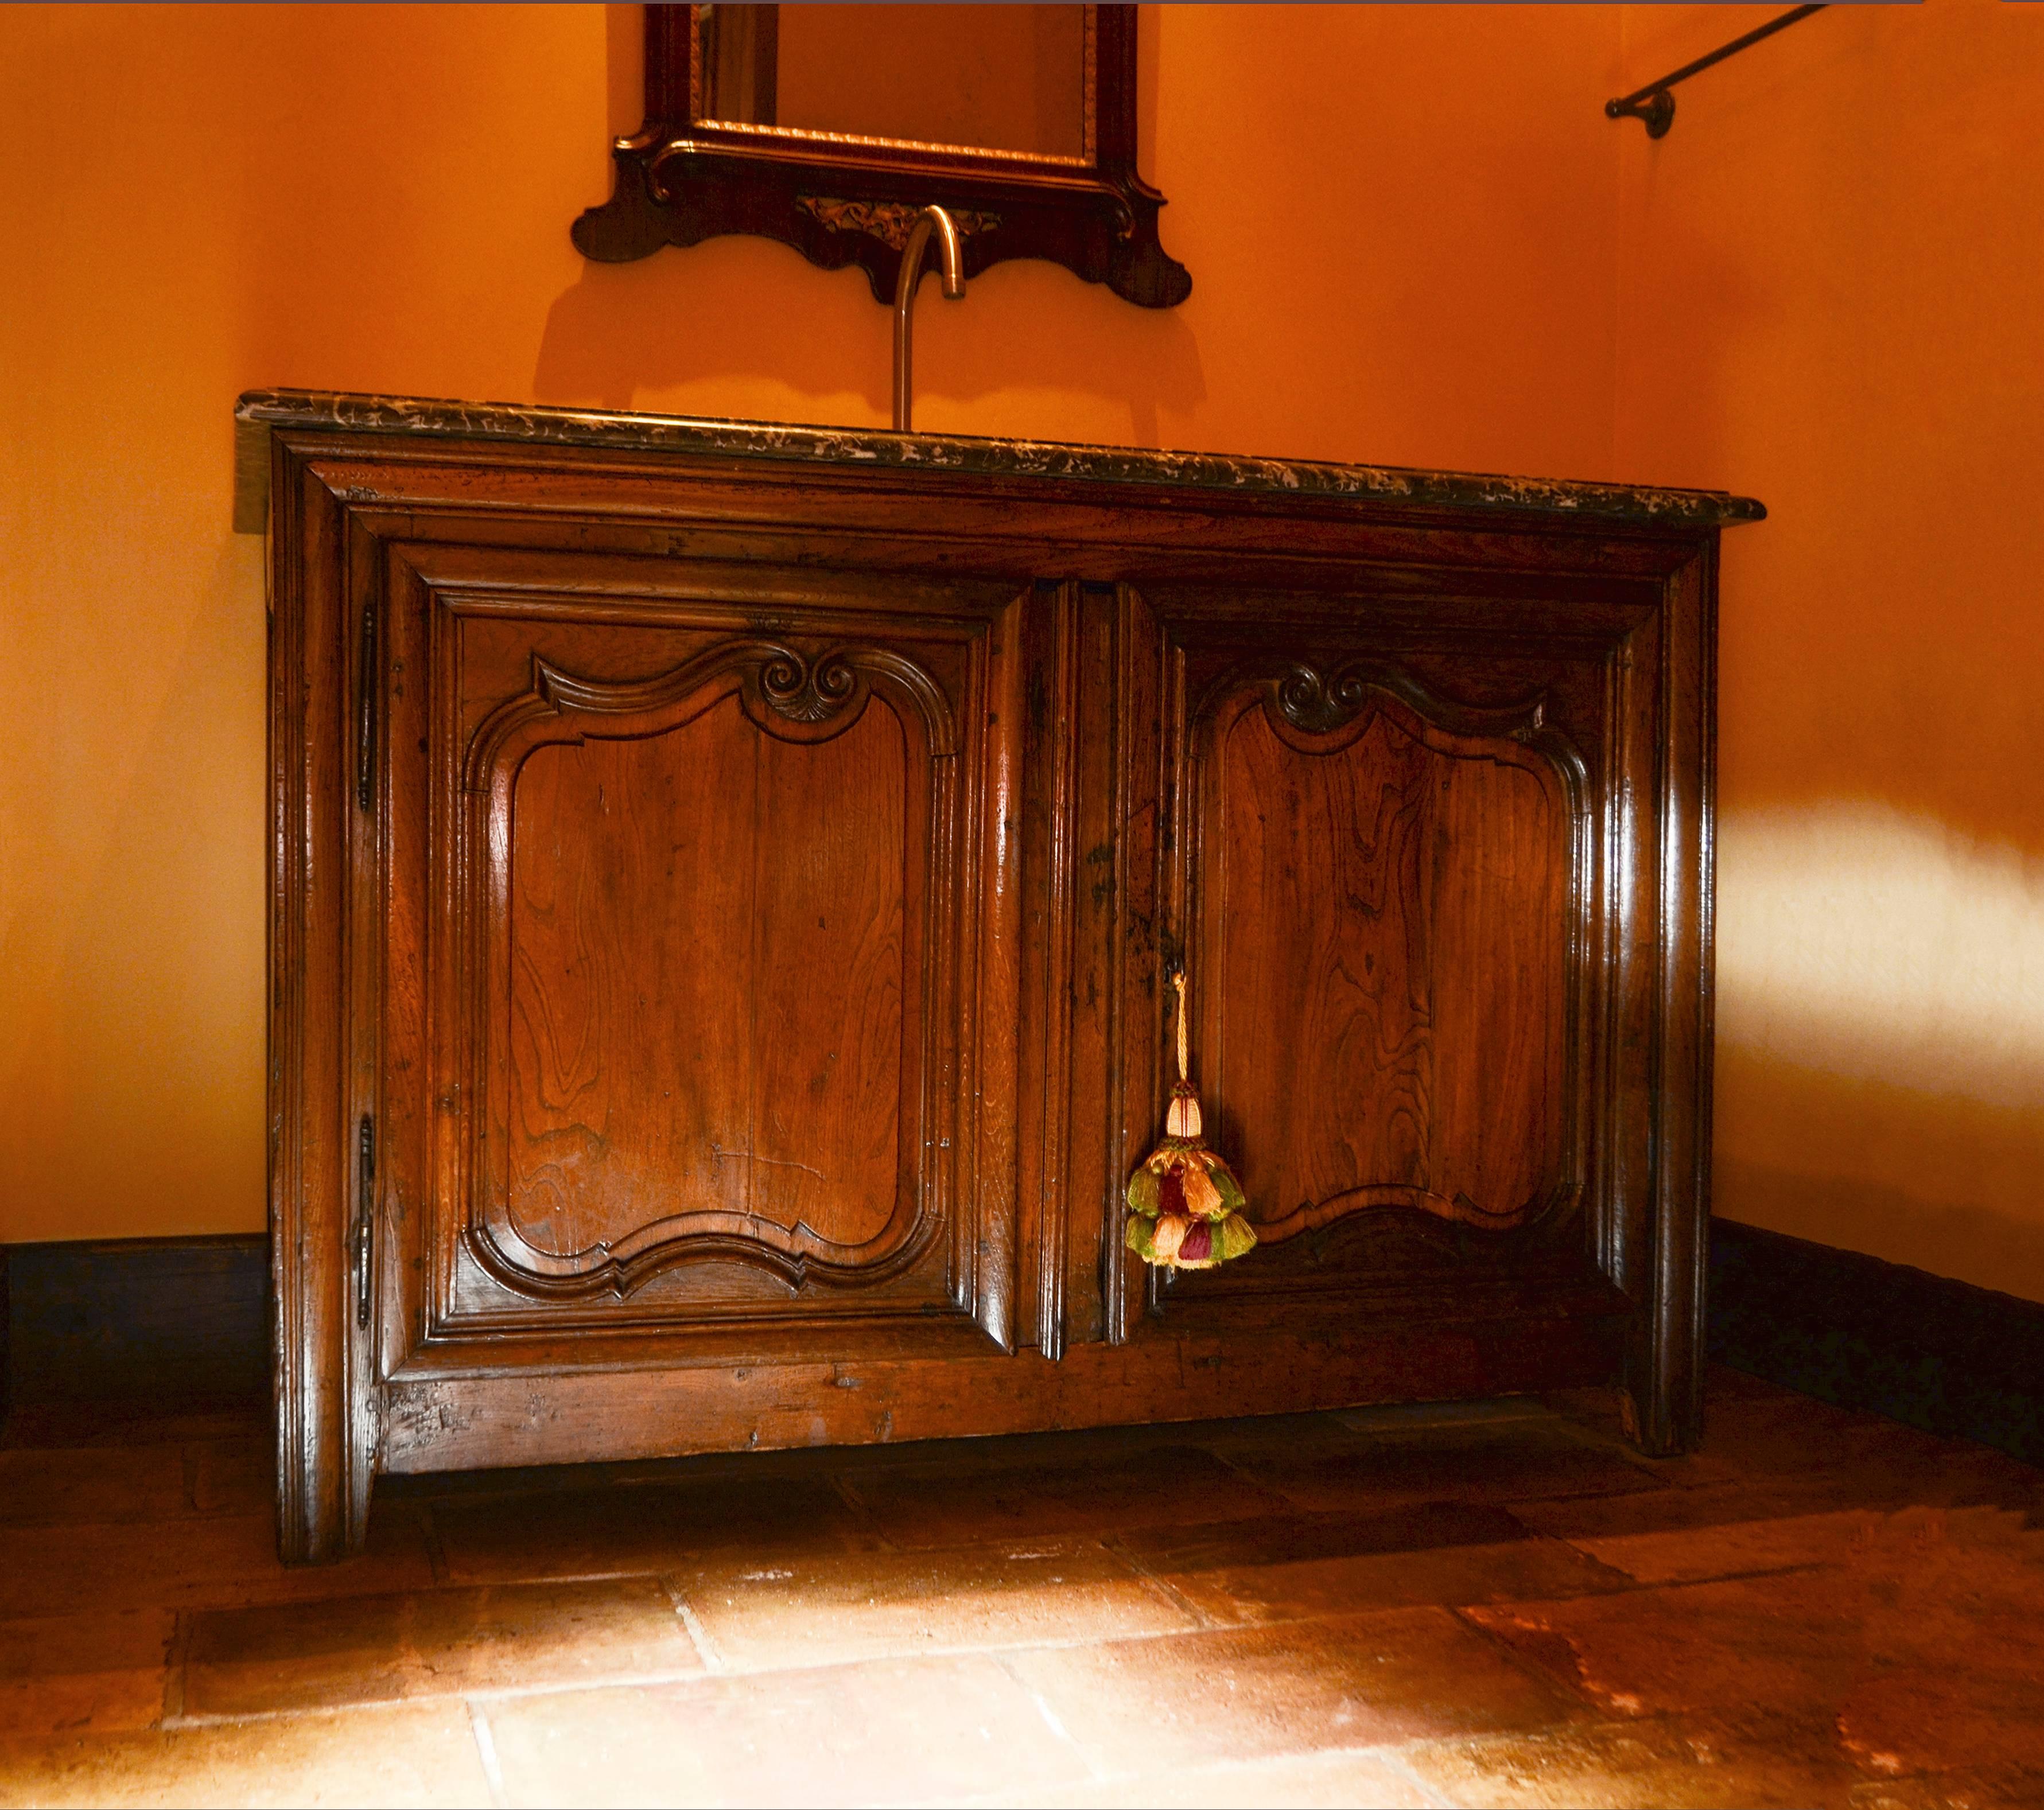 Louis XIV walnut buffet by Jeffrey Miller Design, circa late 17th century with rectangular marble top, two carved doors and shaped straight feet. Converted to bathroom vanity with dropped sink.